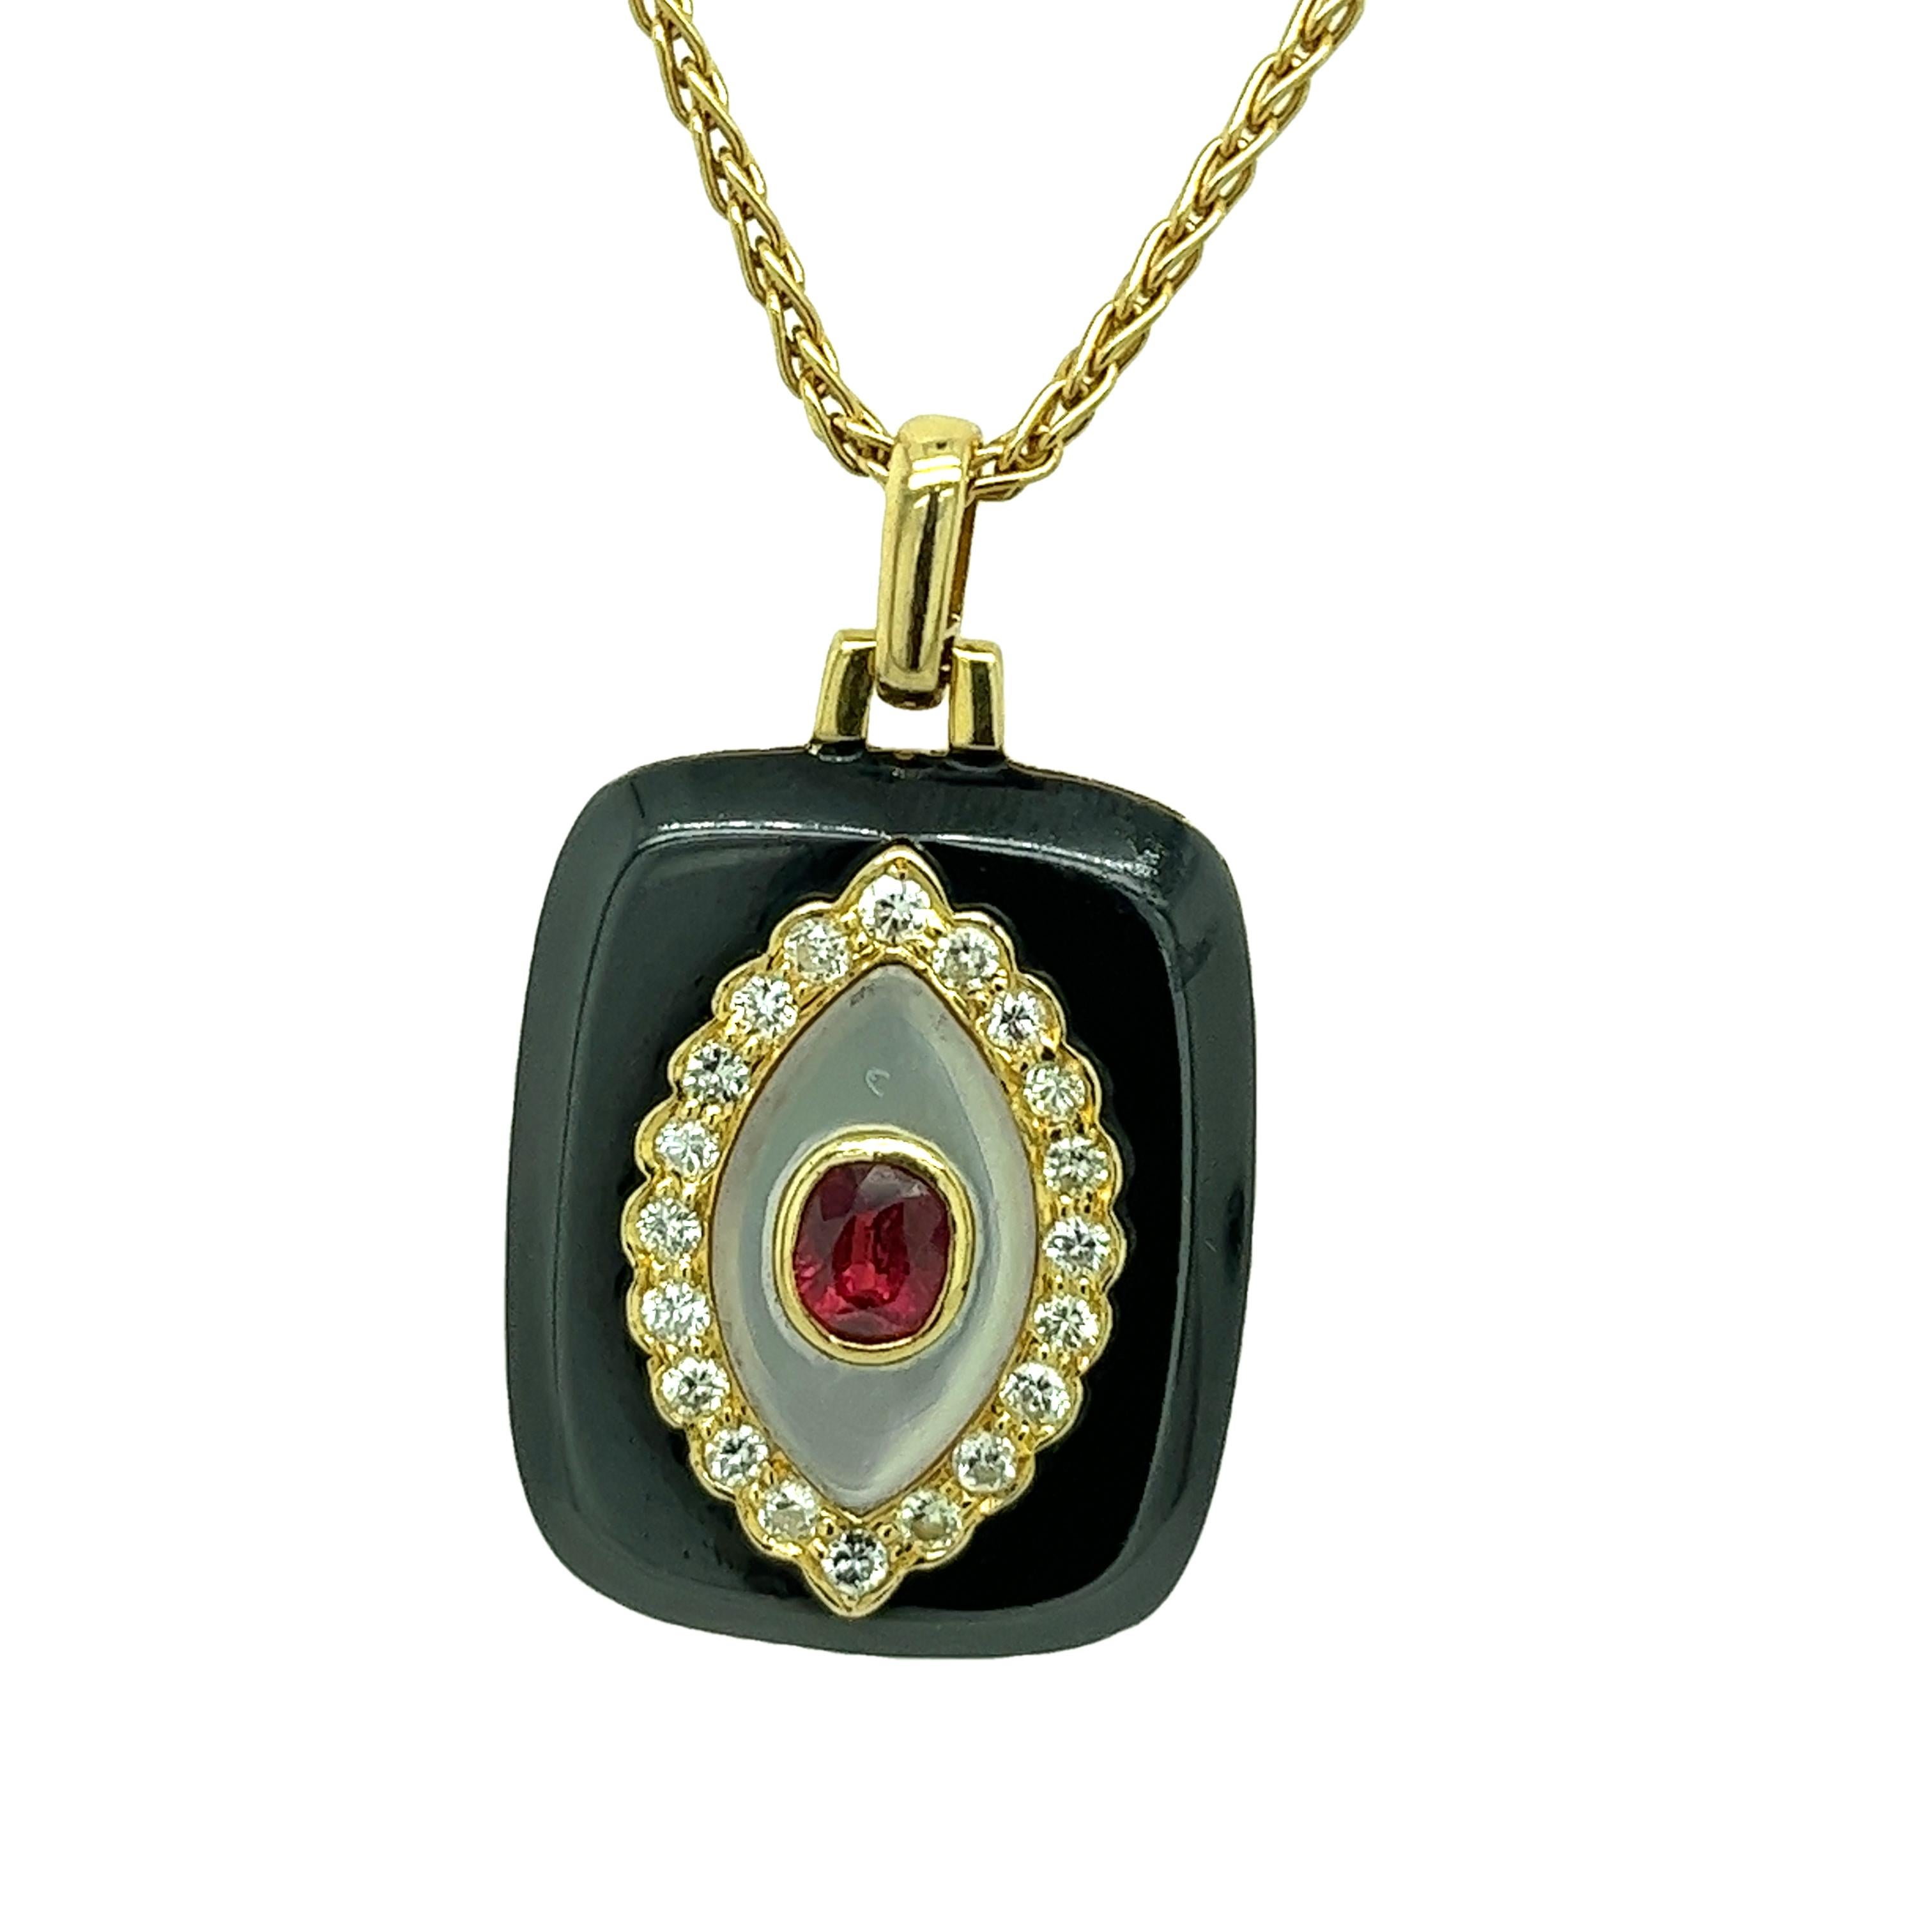 This gorgeous ruby & diamond black enameled pendant is set with an oval natural ruby and 20 round brilliant cut diamonds in 18ct yellow gold setting. The pendant is suspended from an 18-yellow gold chain that measures 20 inches.

Made by LARRY